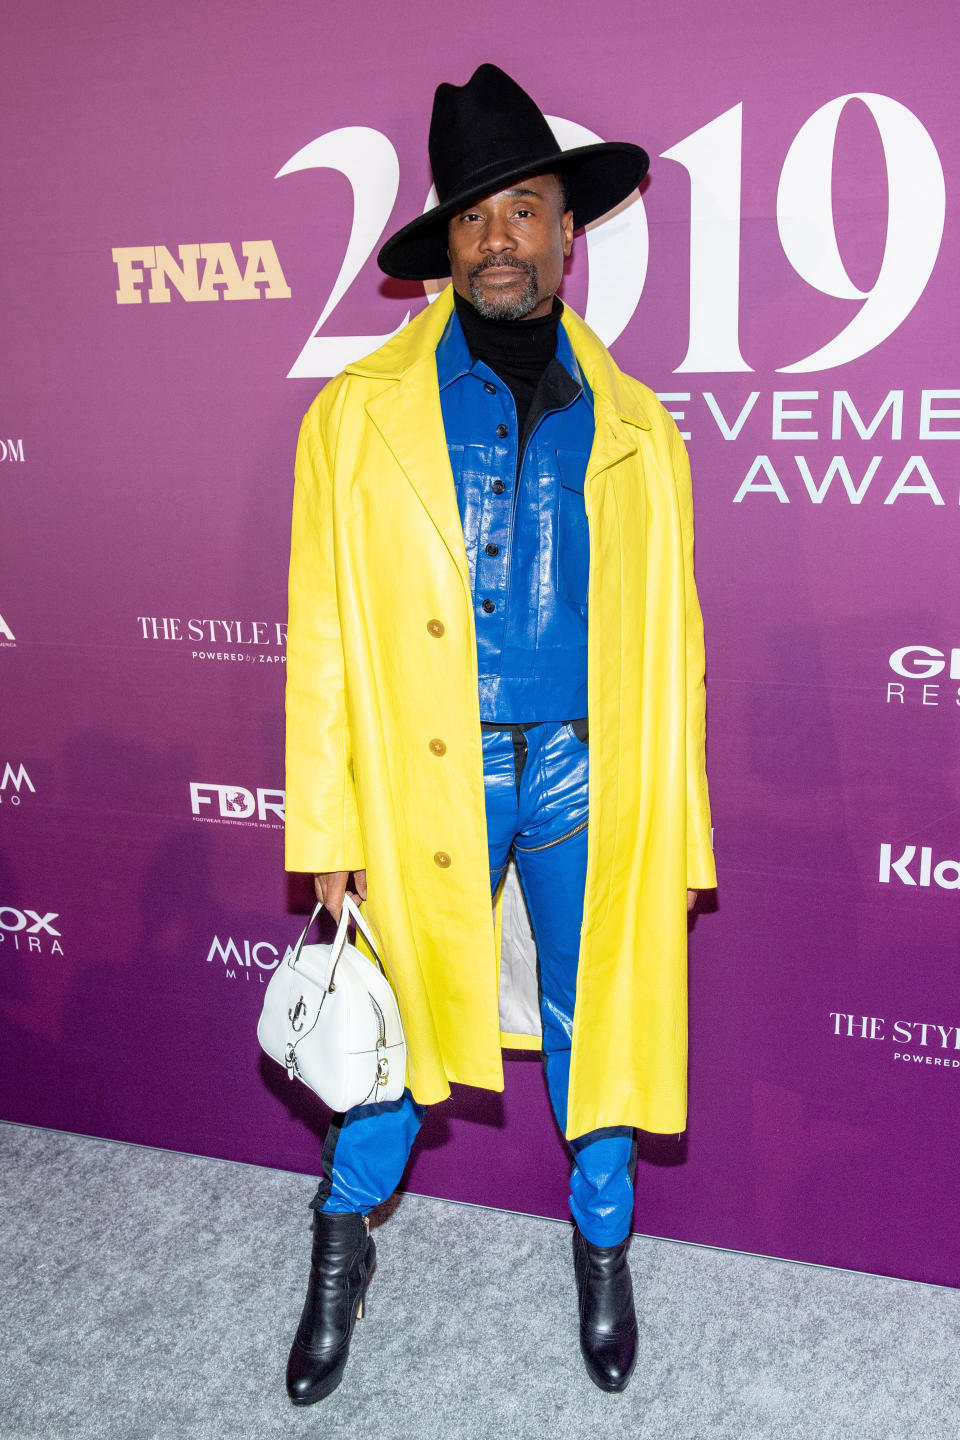 Billy Porter at the Footwear News Achievement Awards in New York City on Dec. 3.